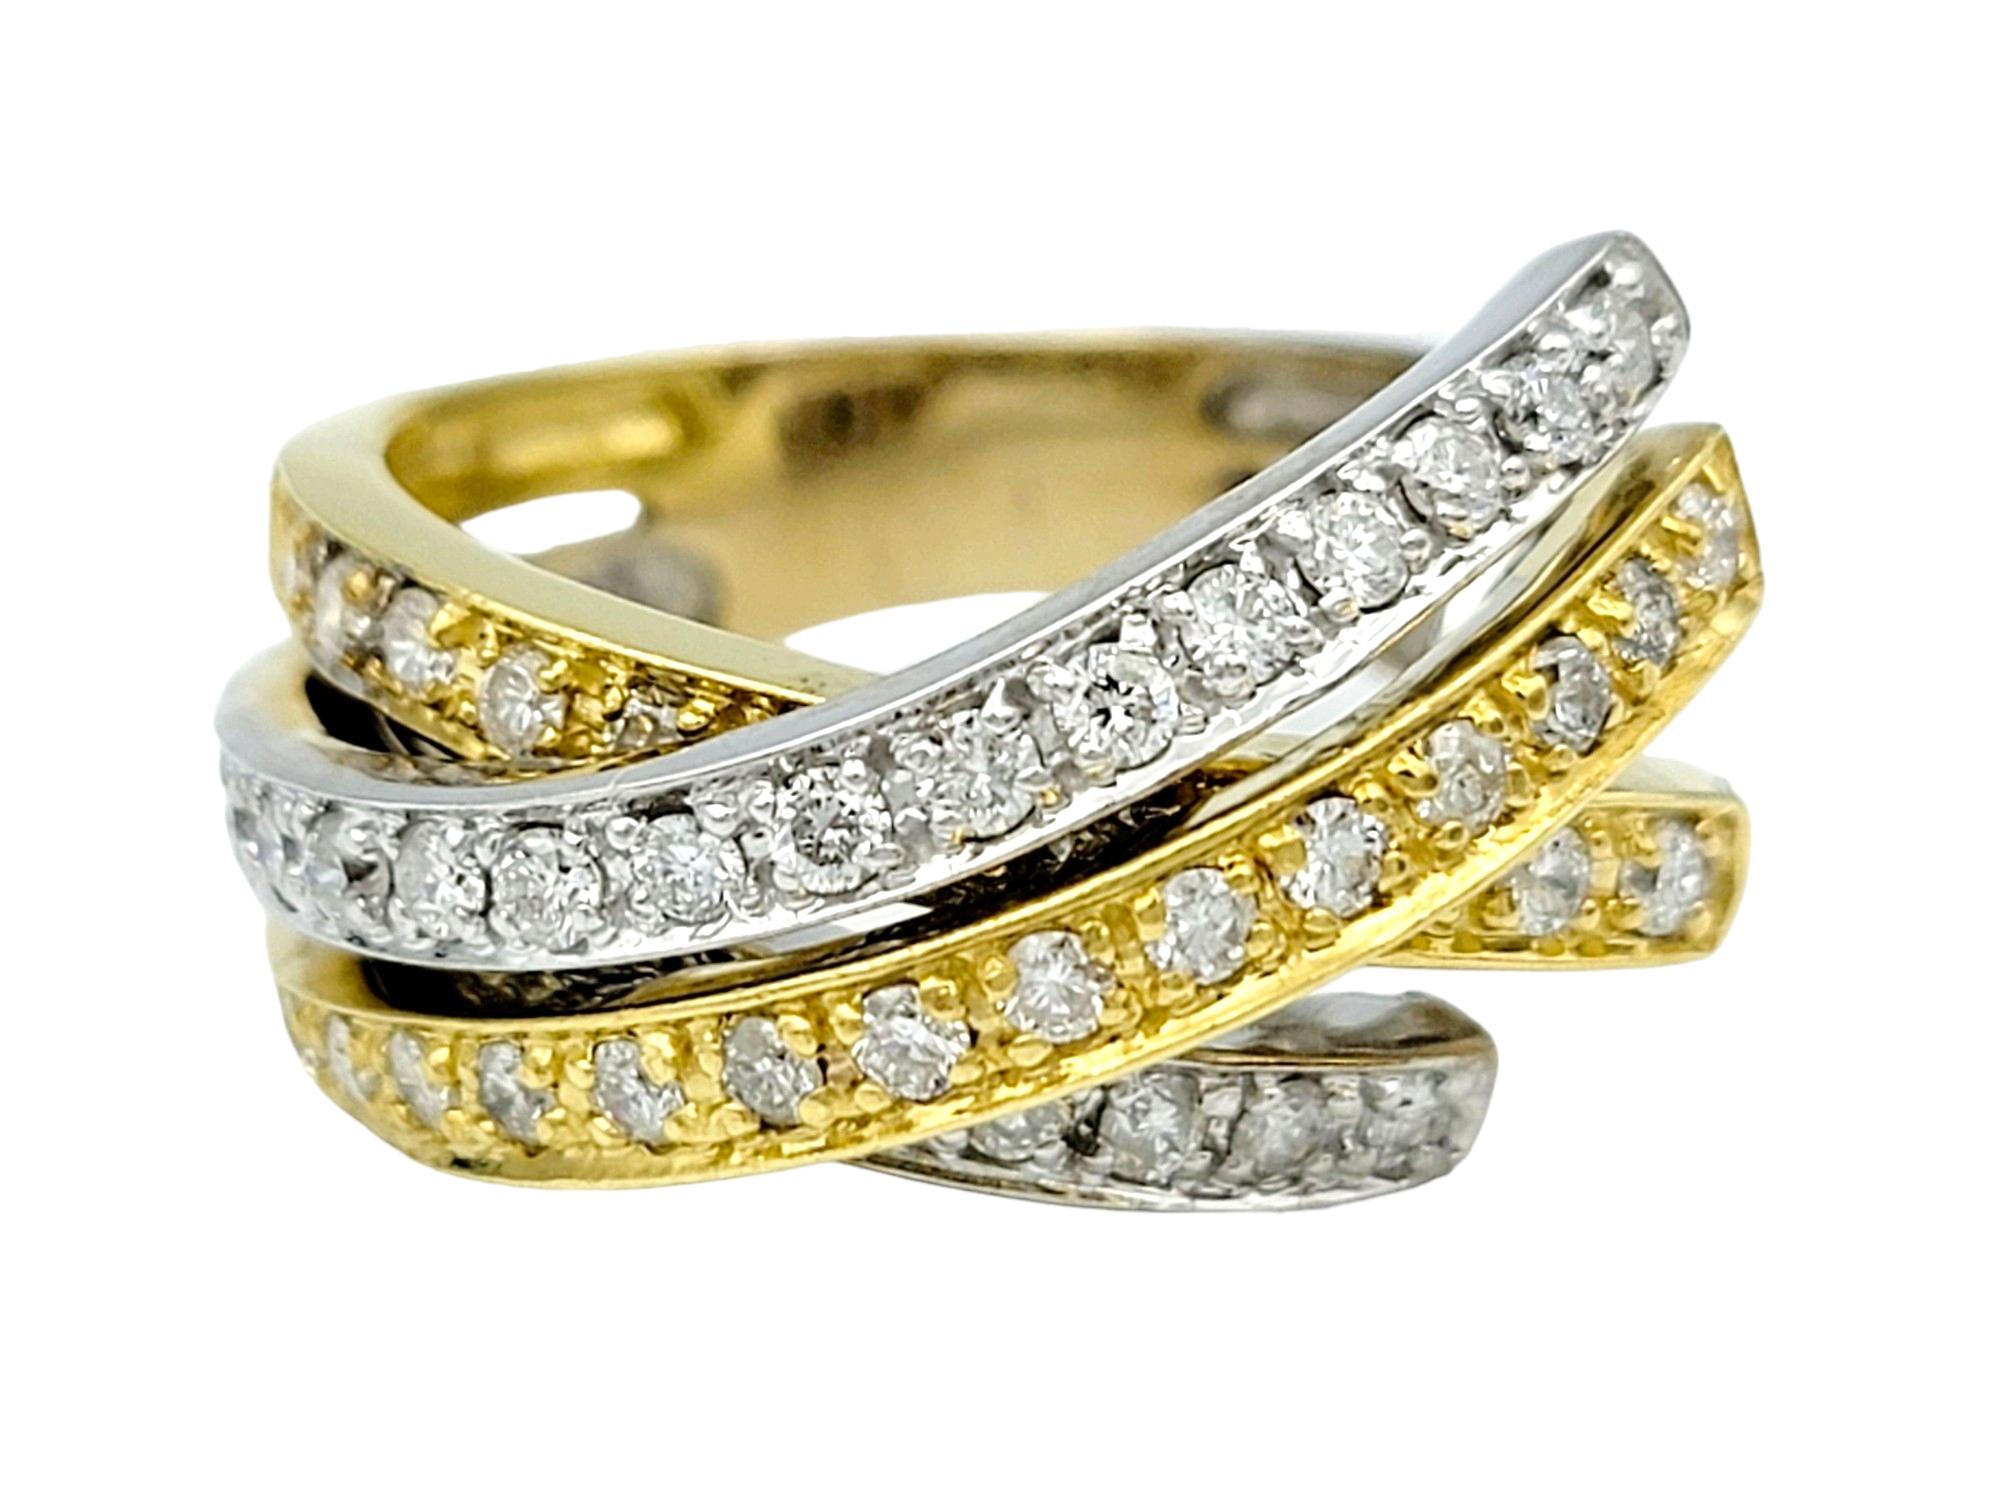 Contemporary Sonia B. Multi Row Criss-Cross Diamond Band Ring Set in Two-Toned 18 Karat Gold For Sale